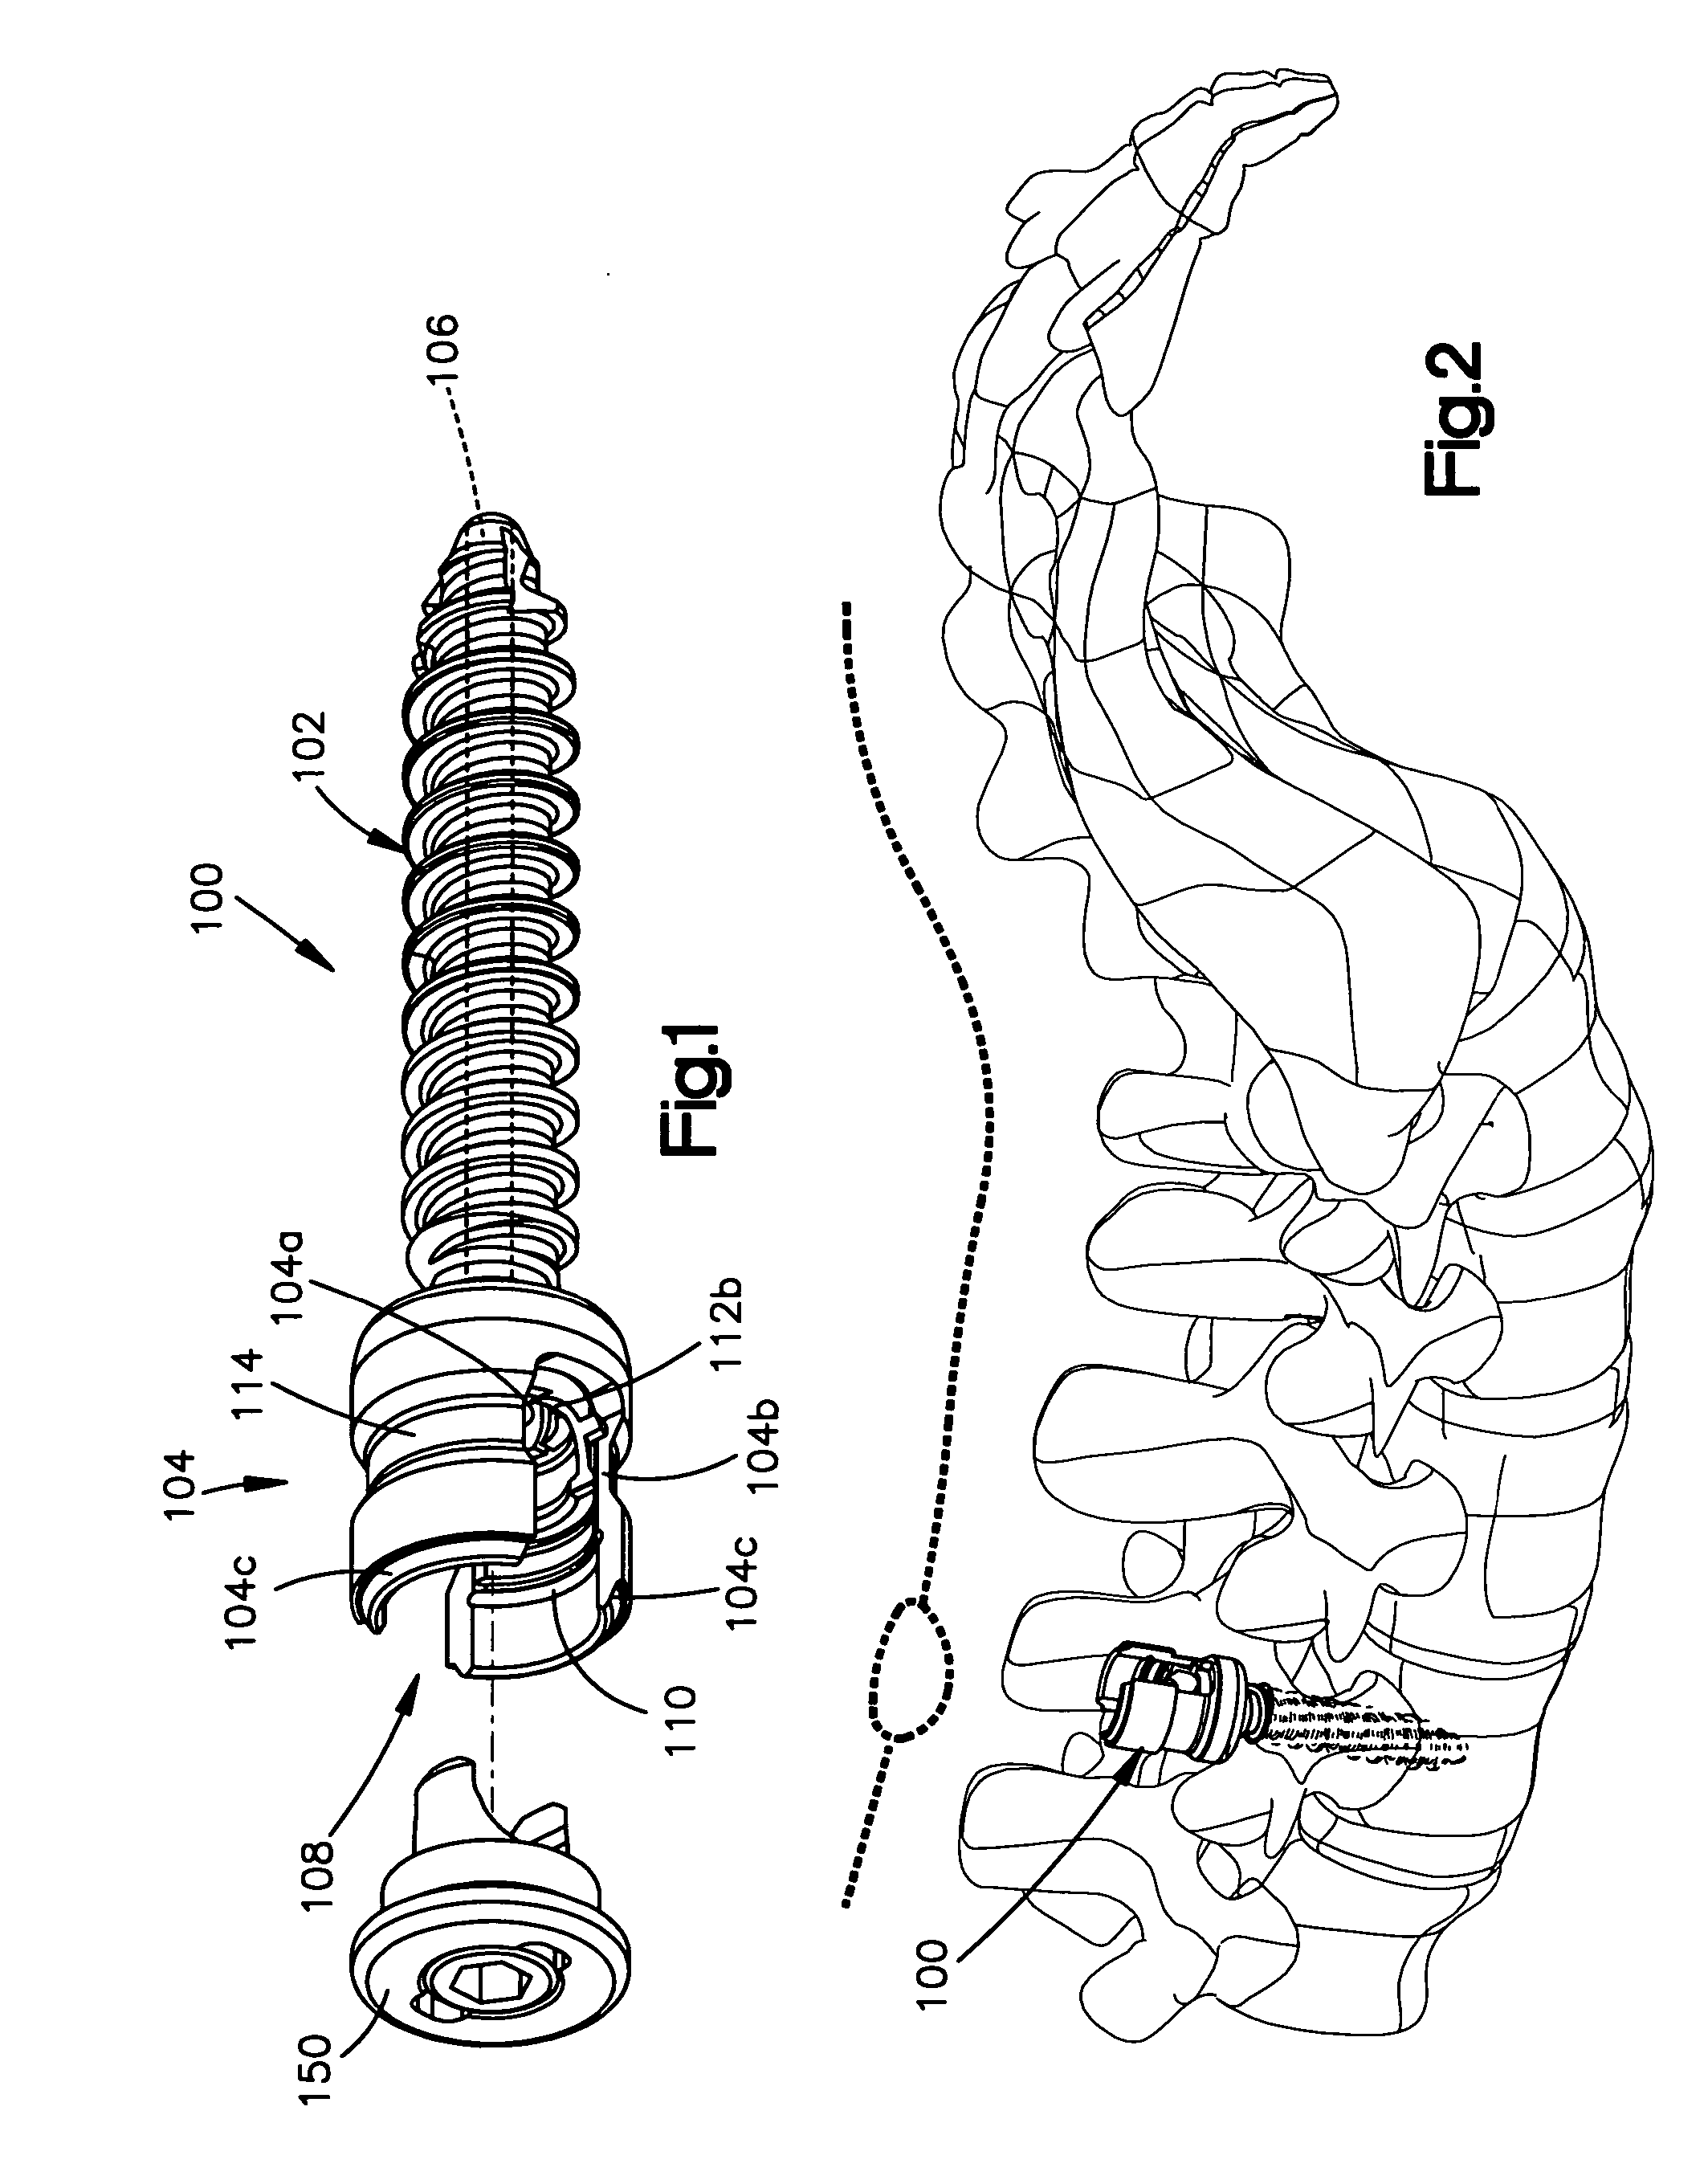 Methods of spinal fixation and instrumentation